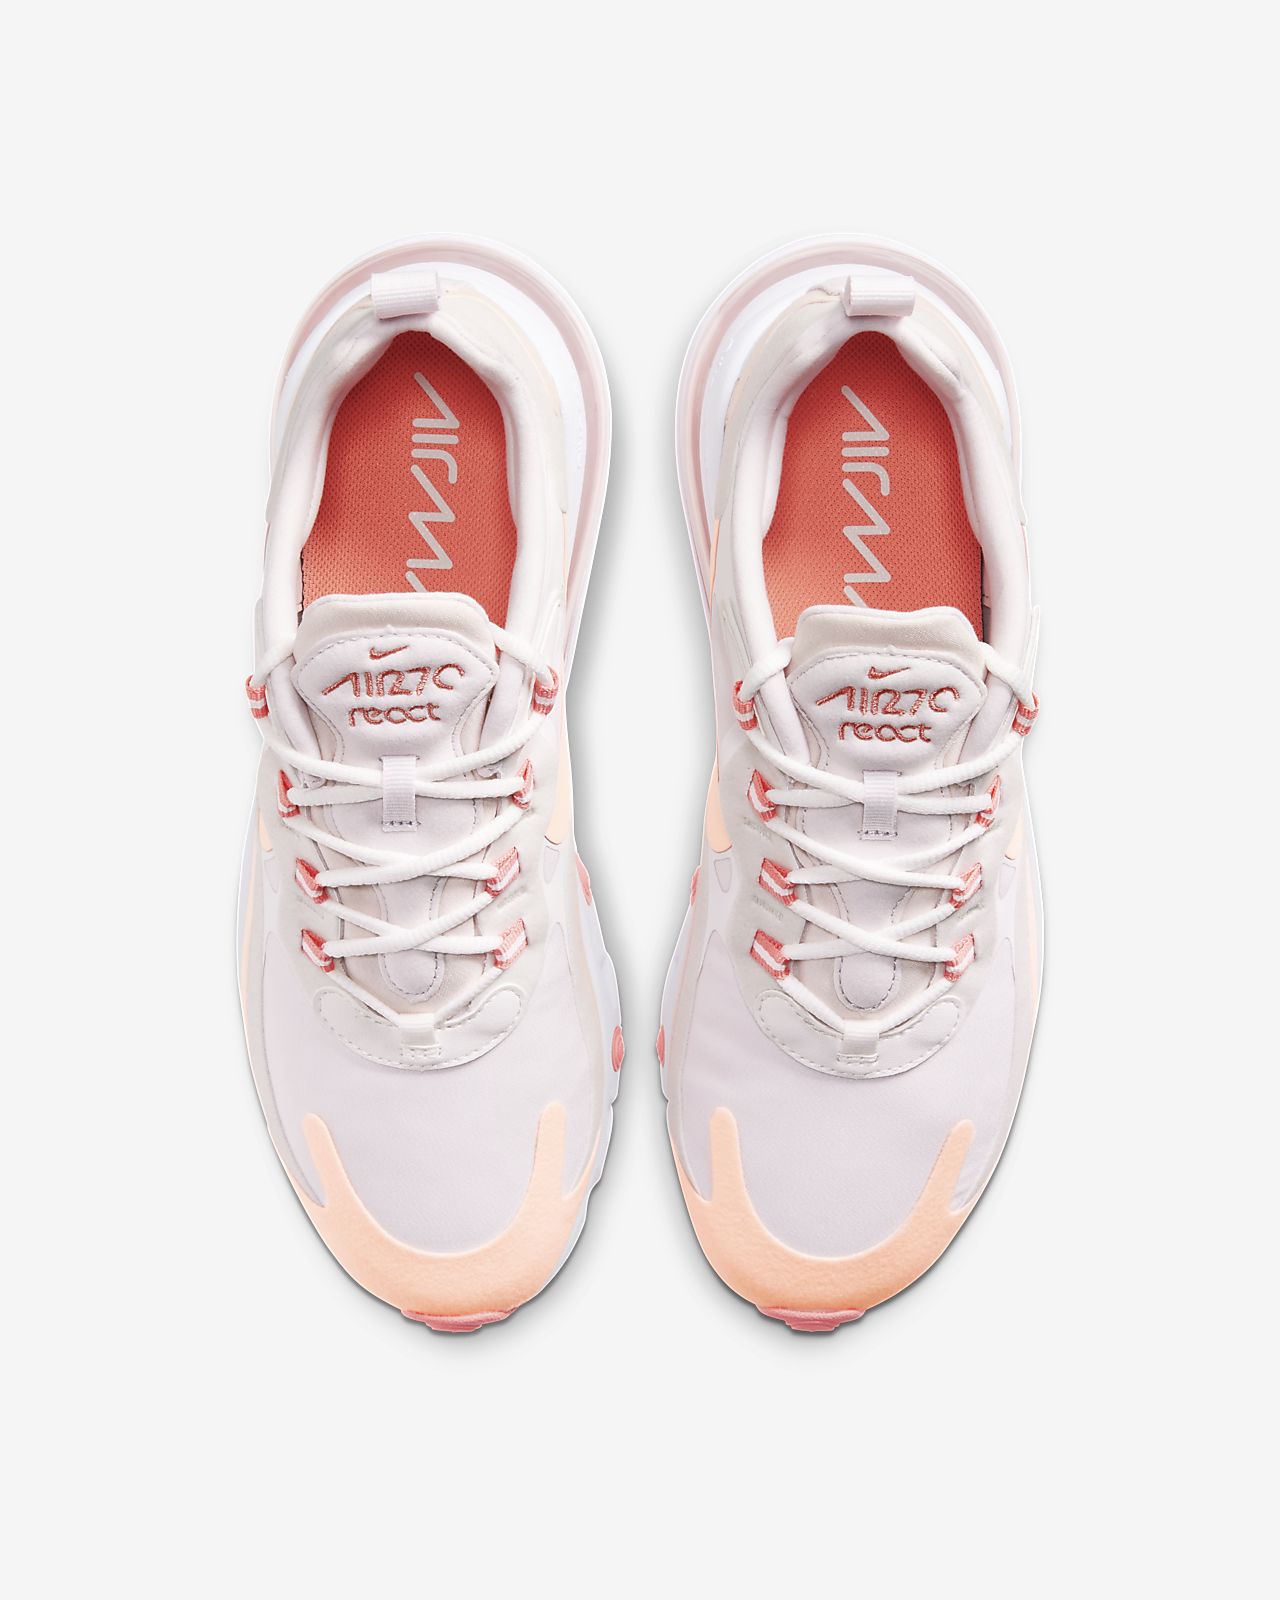 Nike Air Max 270 Summit White Shop Clothing Shoes Online